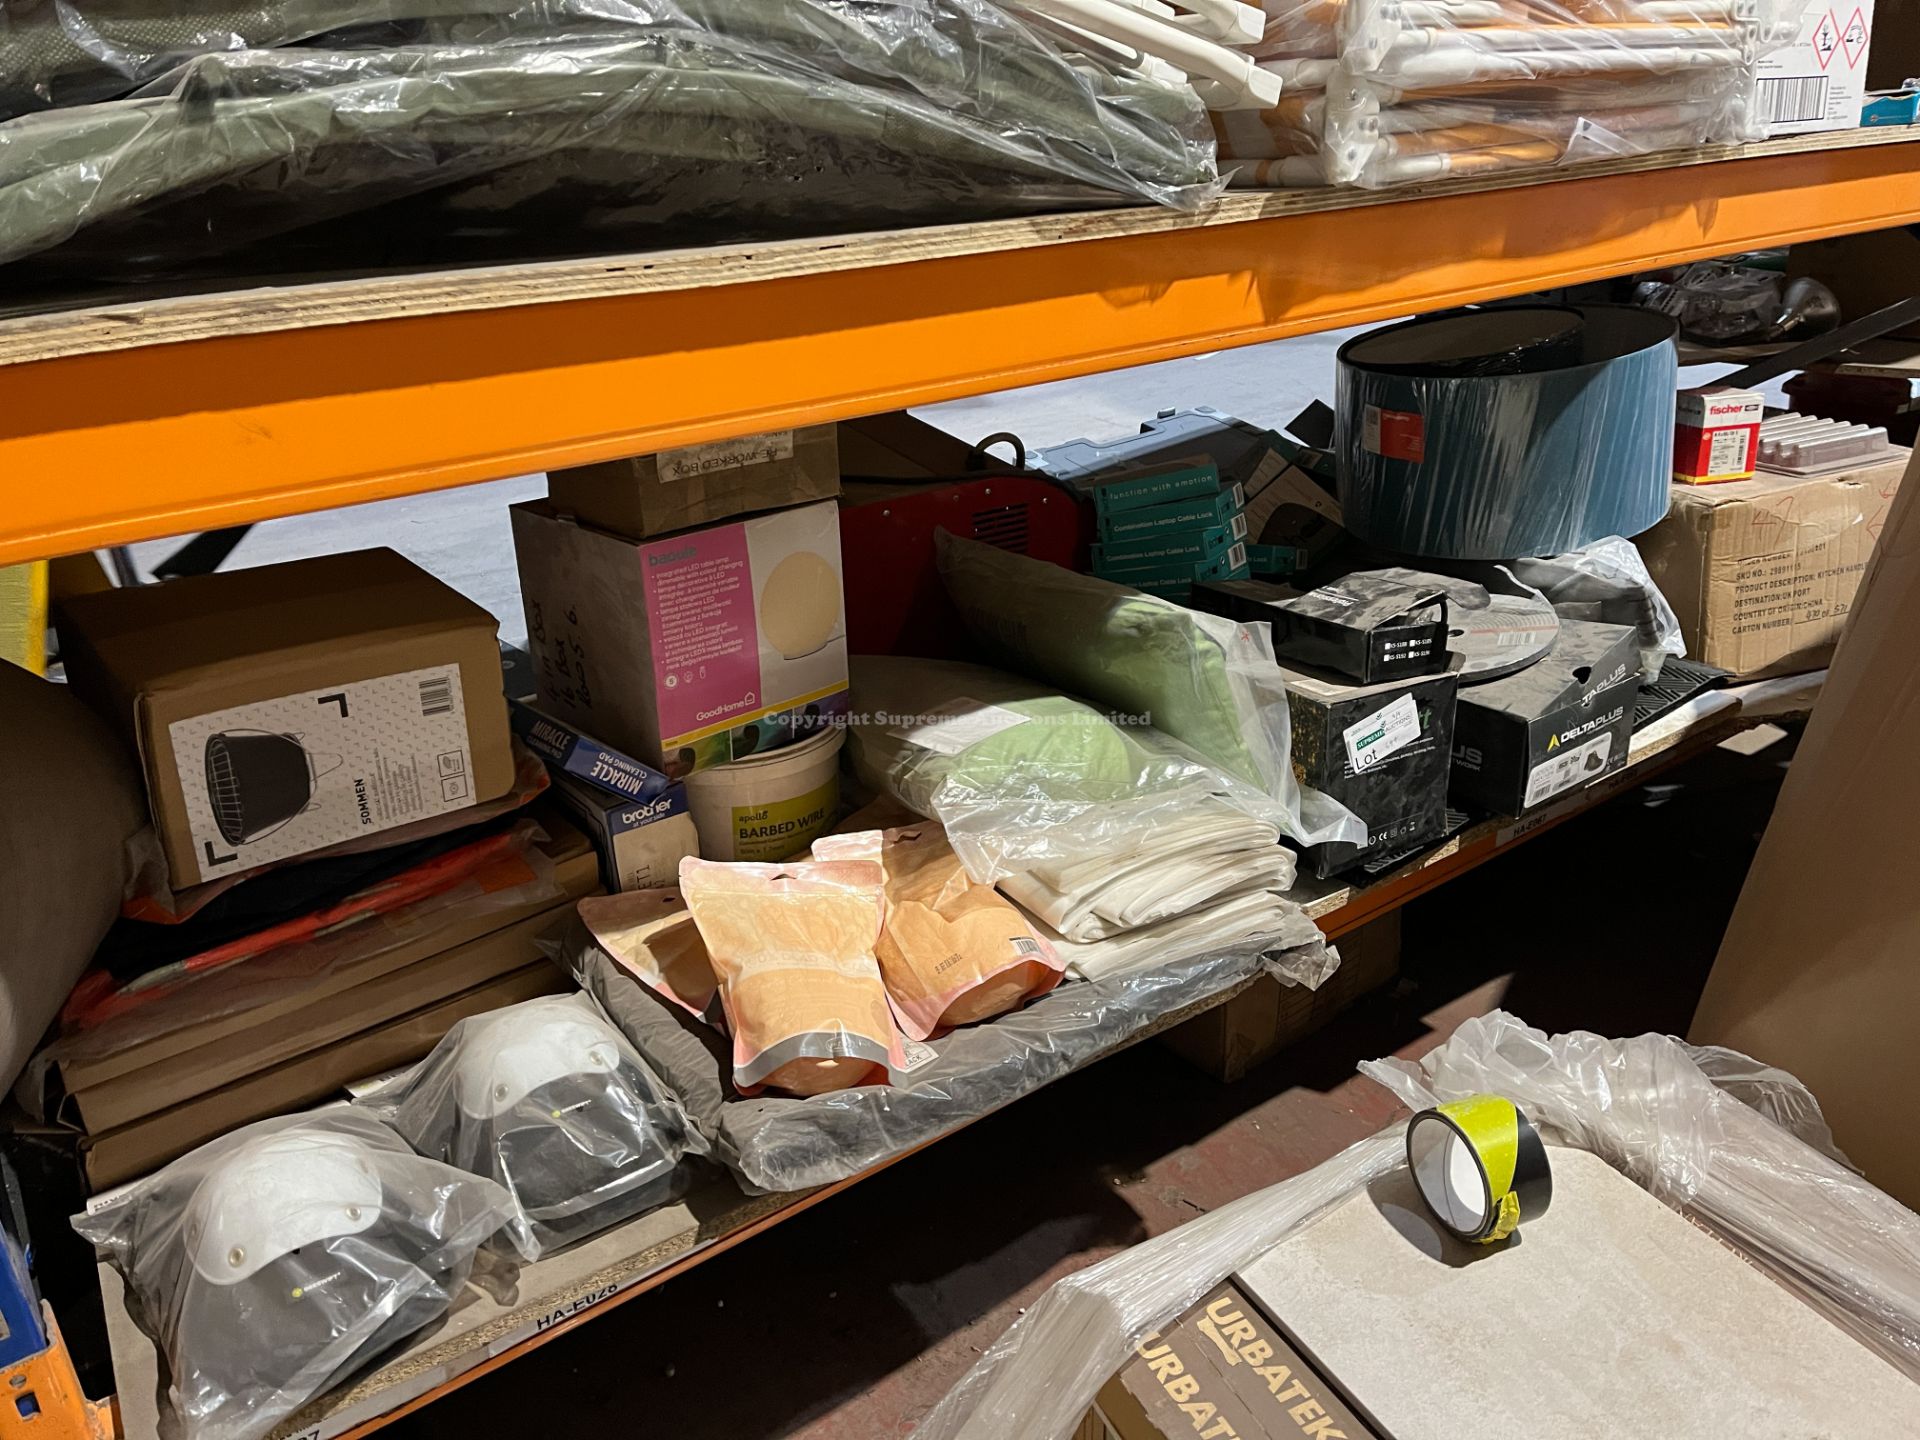 LARGE HIGH VALUE MIXED LOT ON 1 SHELF TO CONTAIN WORKWEAR, TOOLS, LOCKS ETC. (INSL)